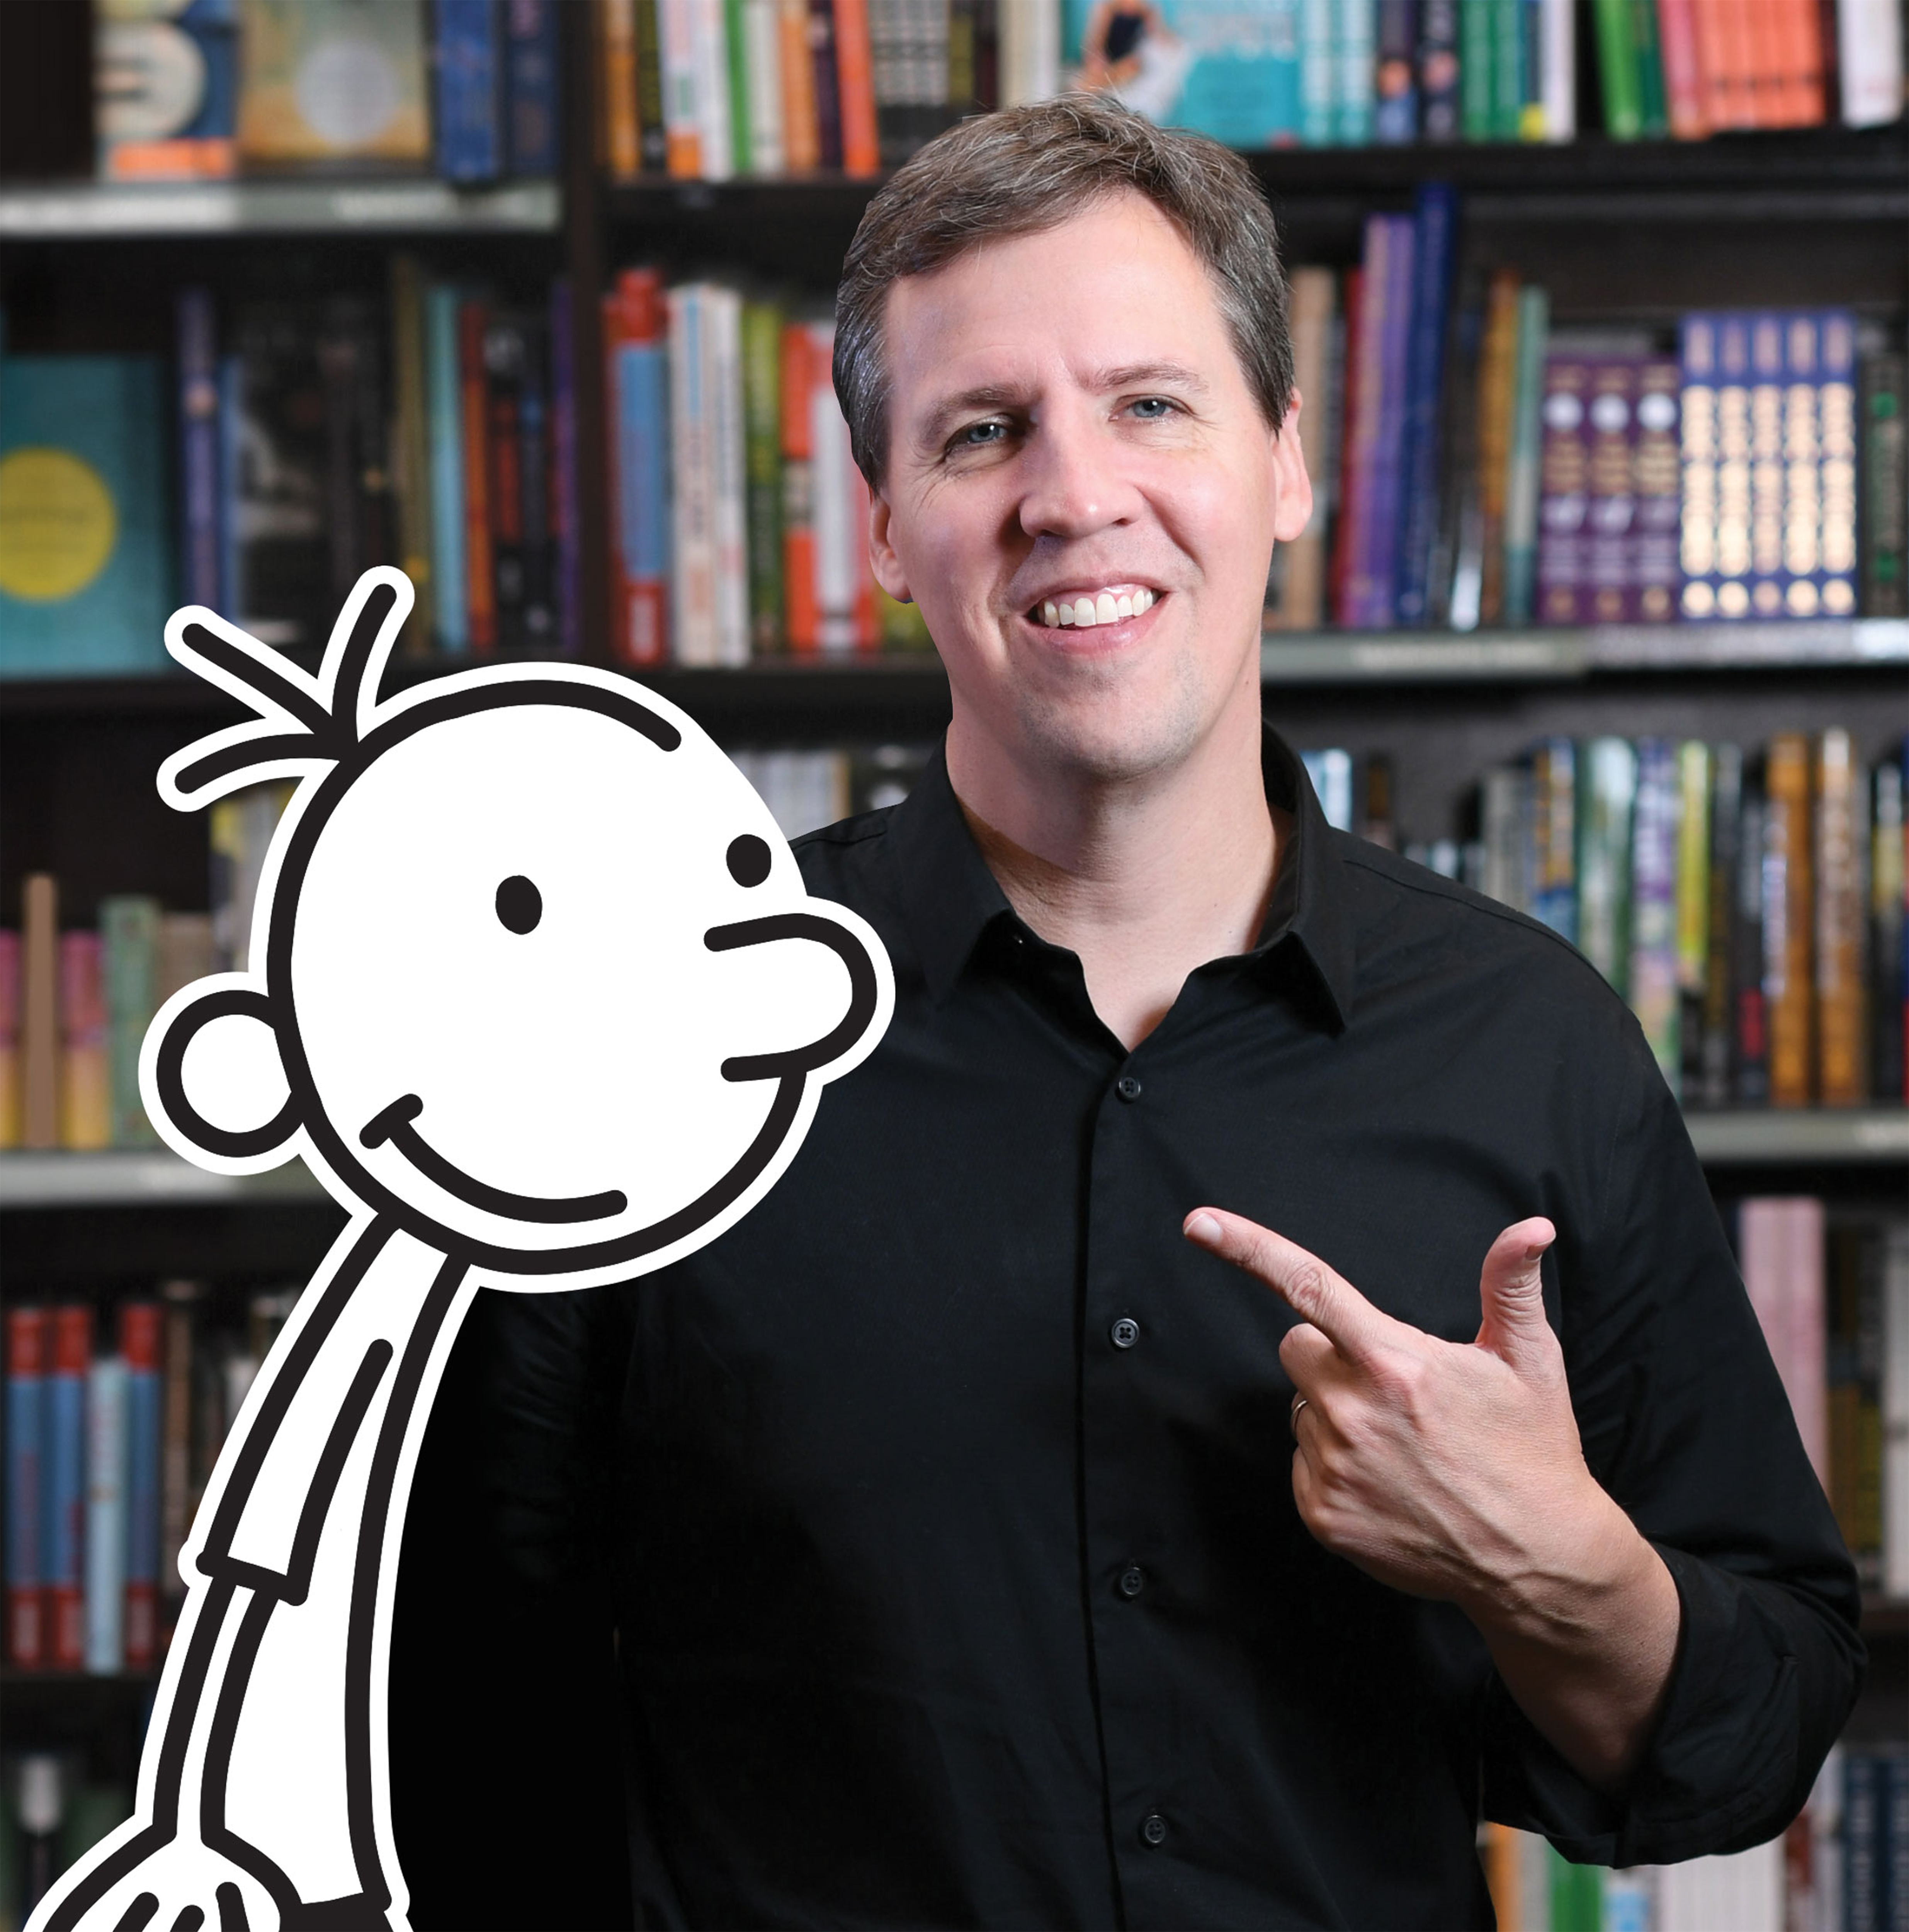 Book Review: No Brainer: Diary of a Wimpy Kid, by Jeff Kinney - Glam  Adelaide